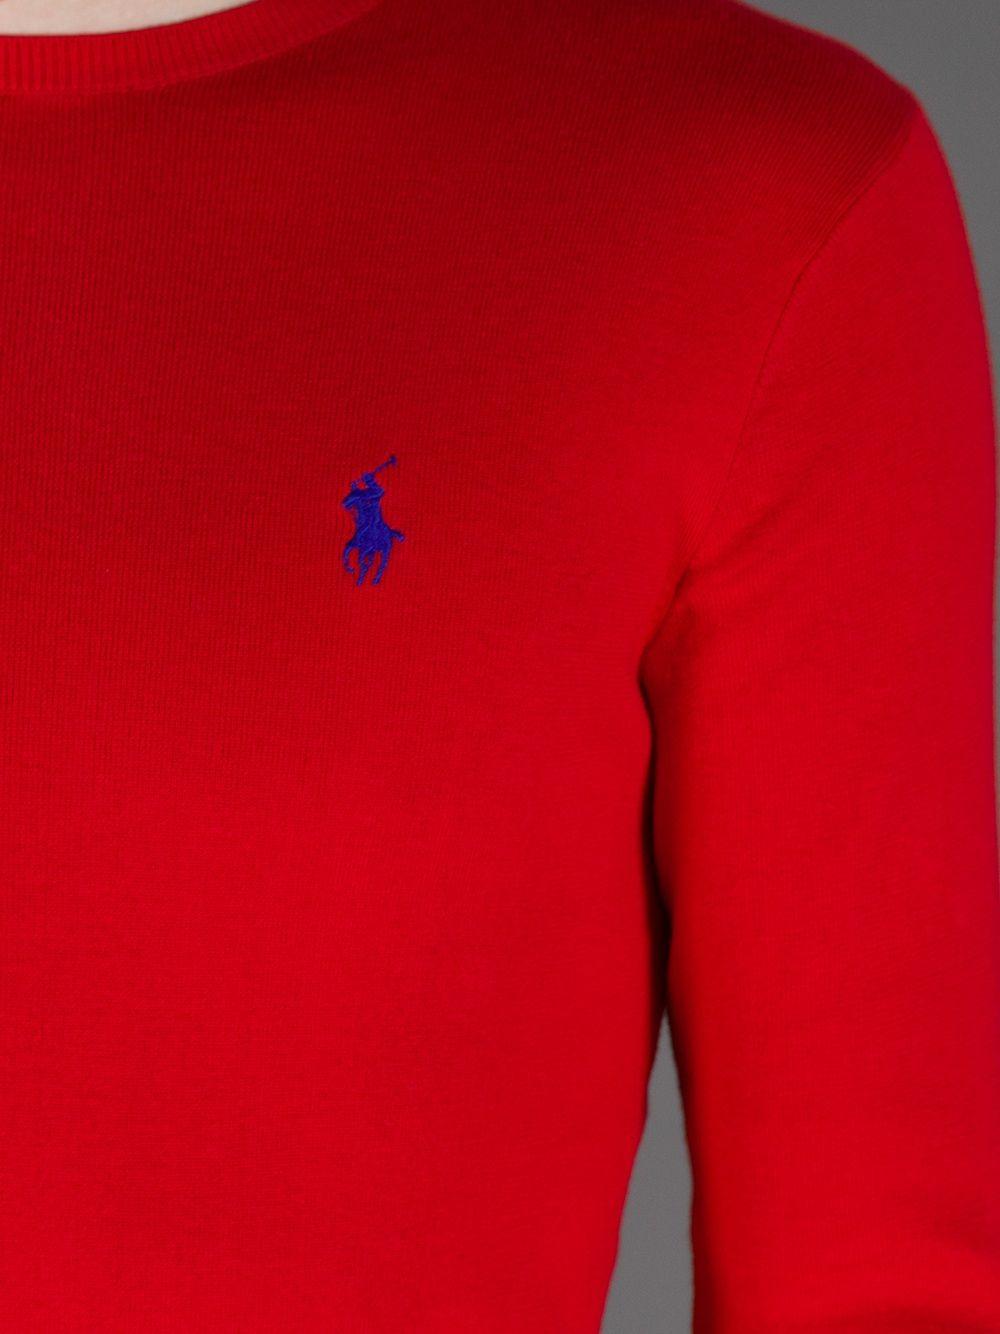 Blue with Red Polo Logo - Polo Ralph Lauren Crew Neck Sweater in Red for Men